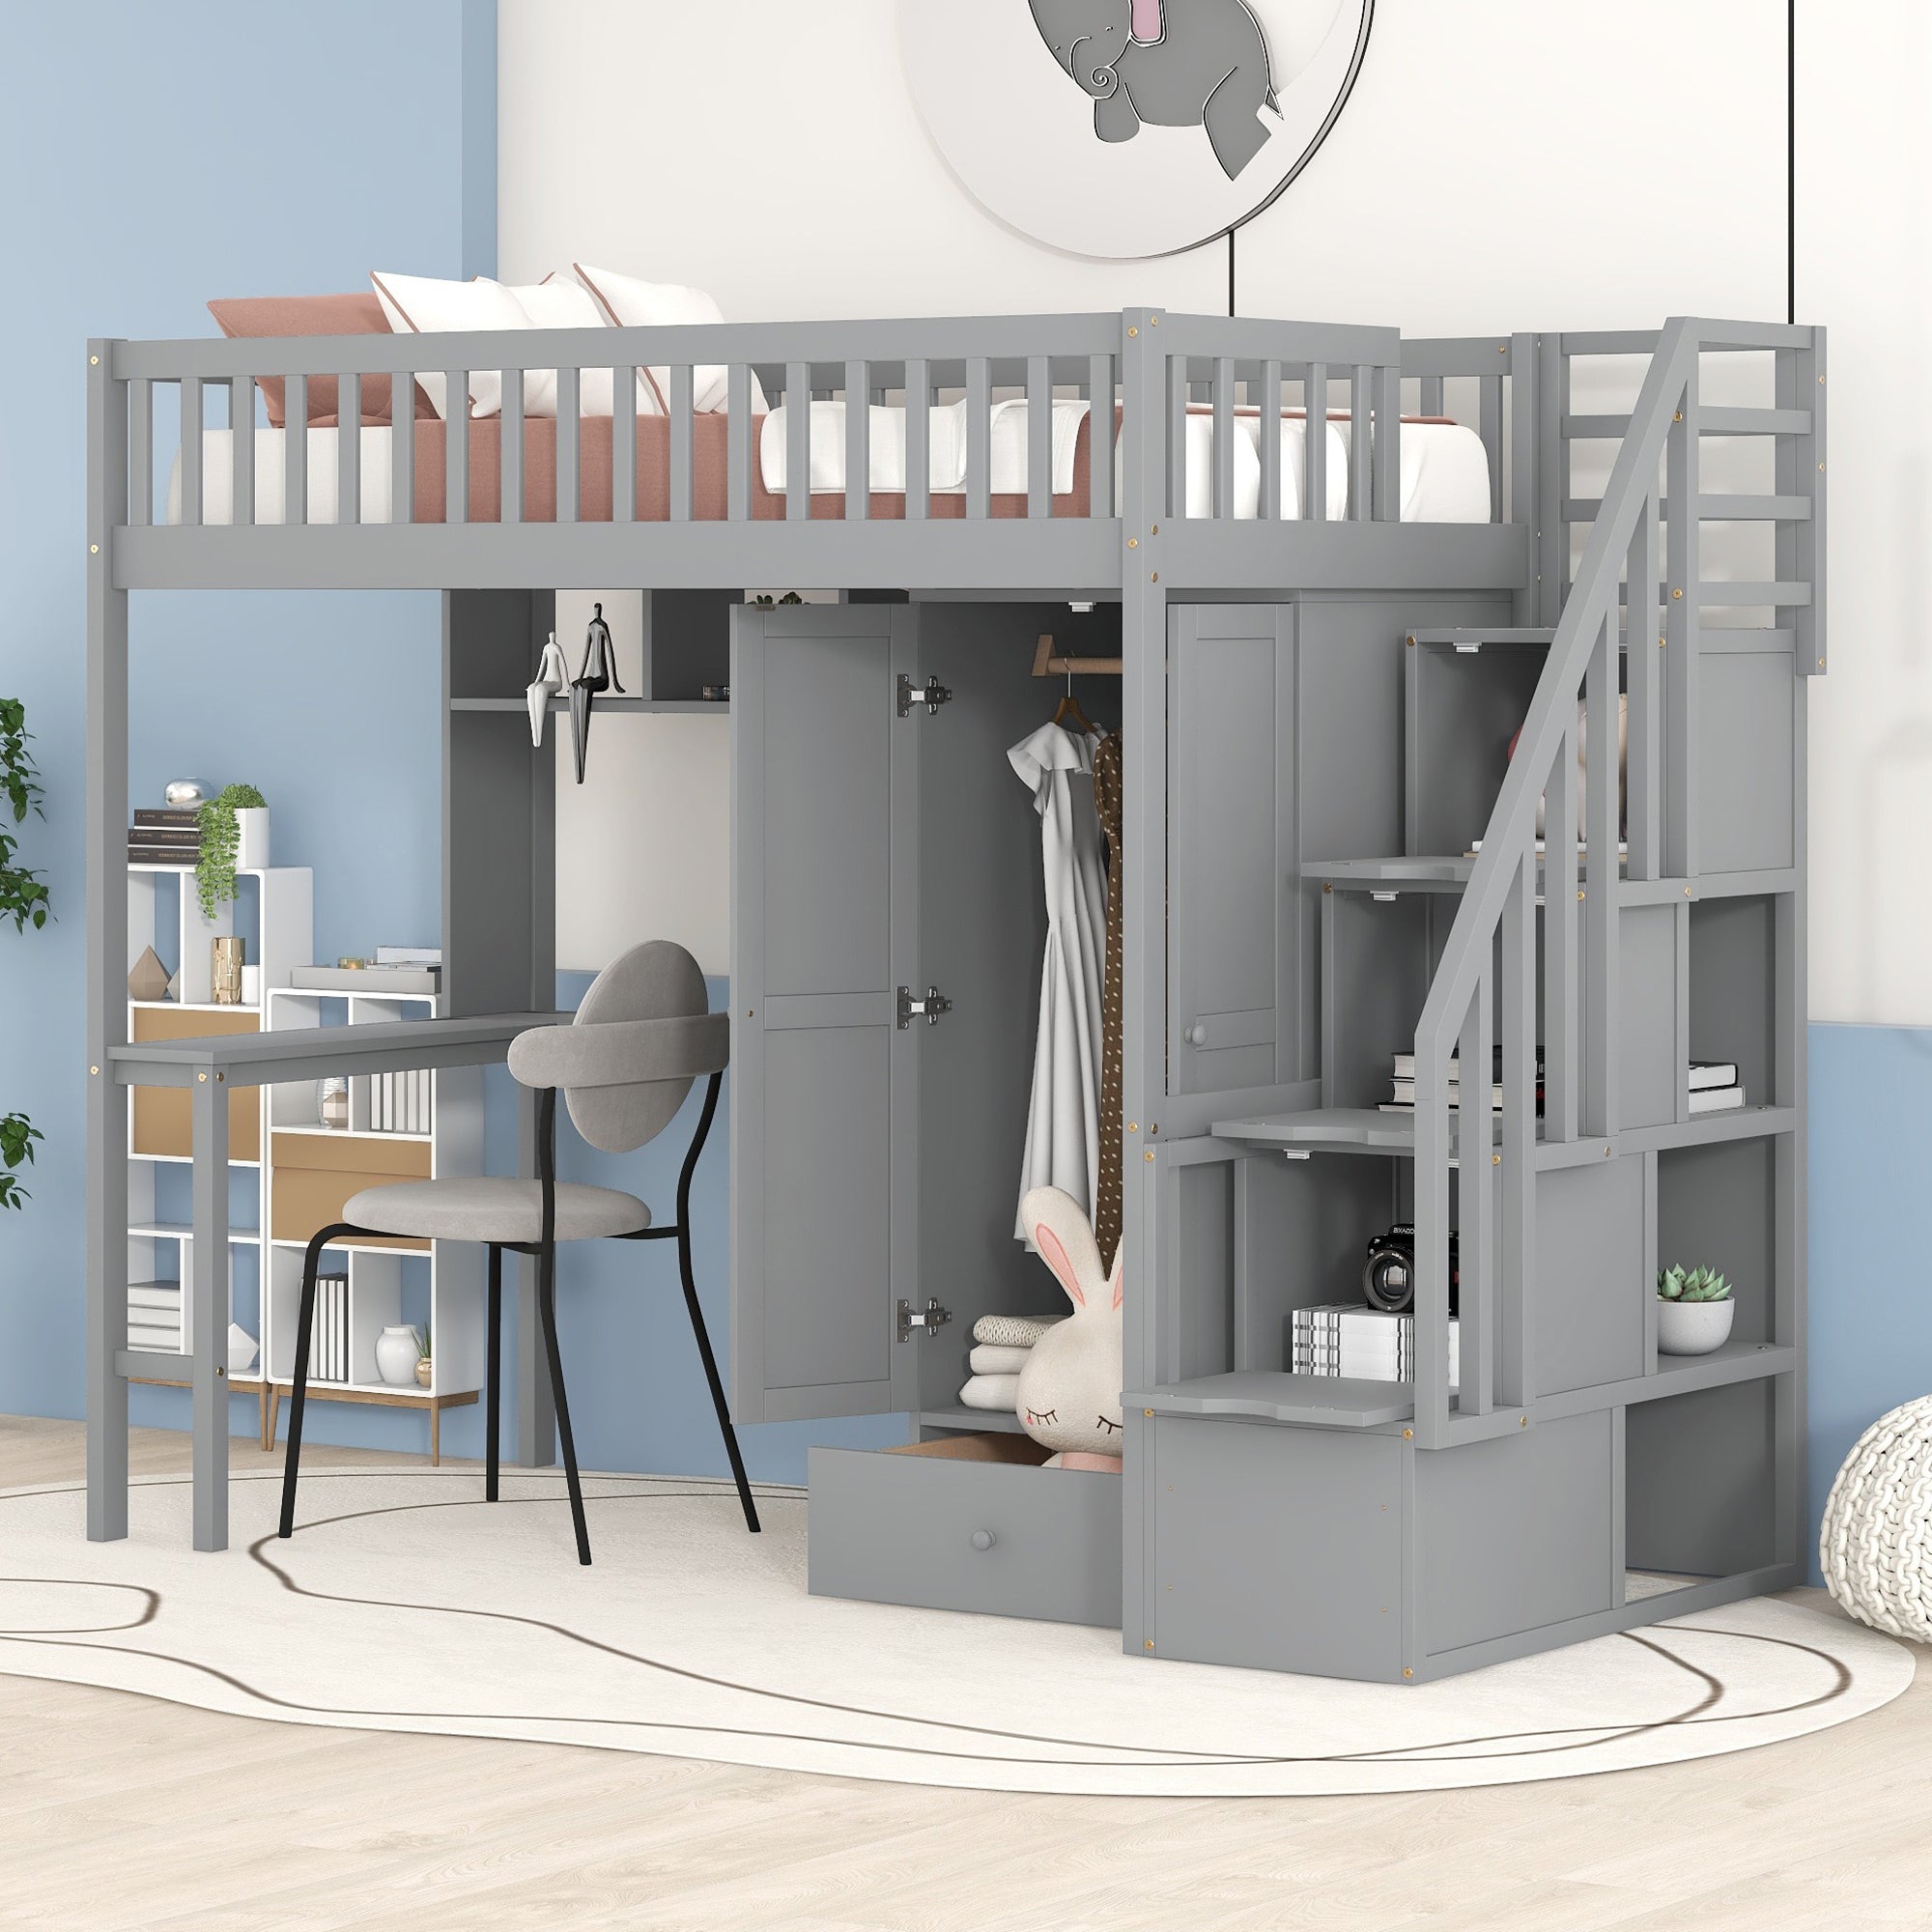 Kruiden Stijg aan de andere kant, Twin size Loft Bed with Bookshelf,Drawers,Desk,and Wardrobe-Gray